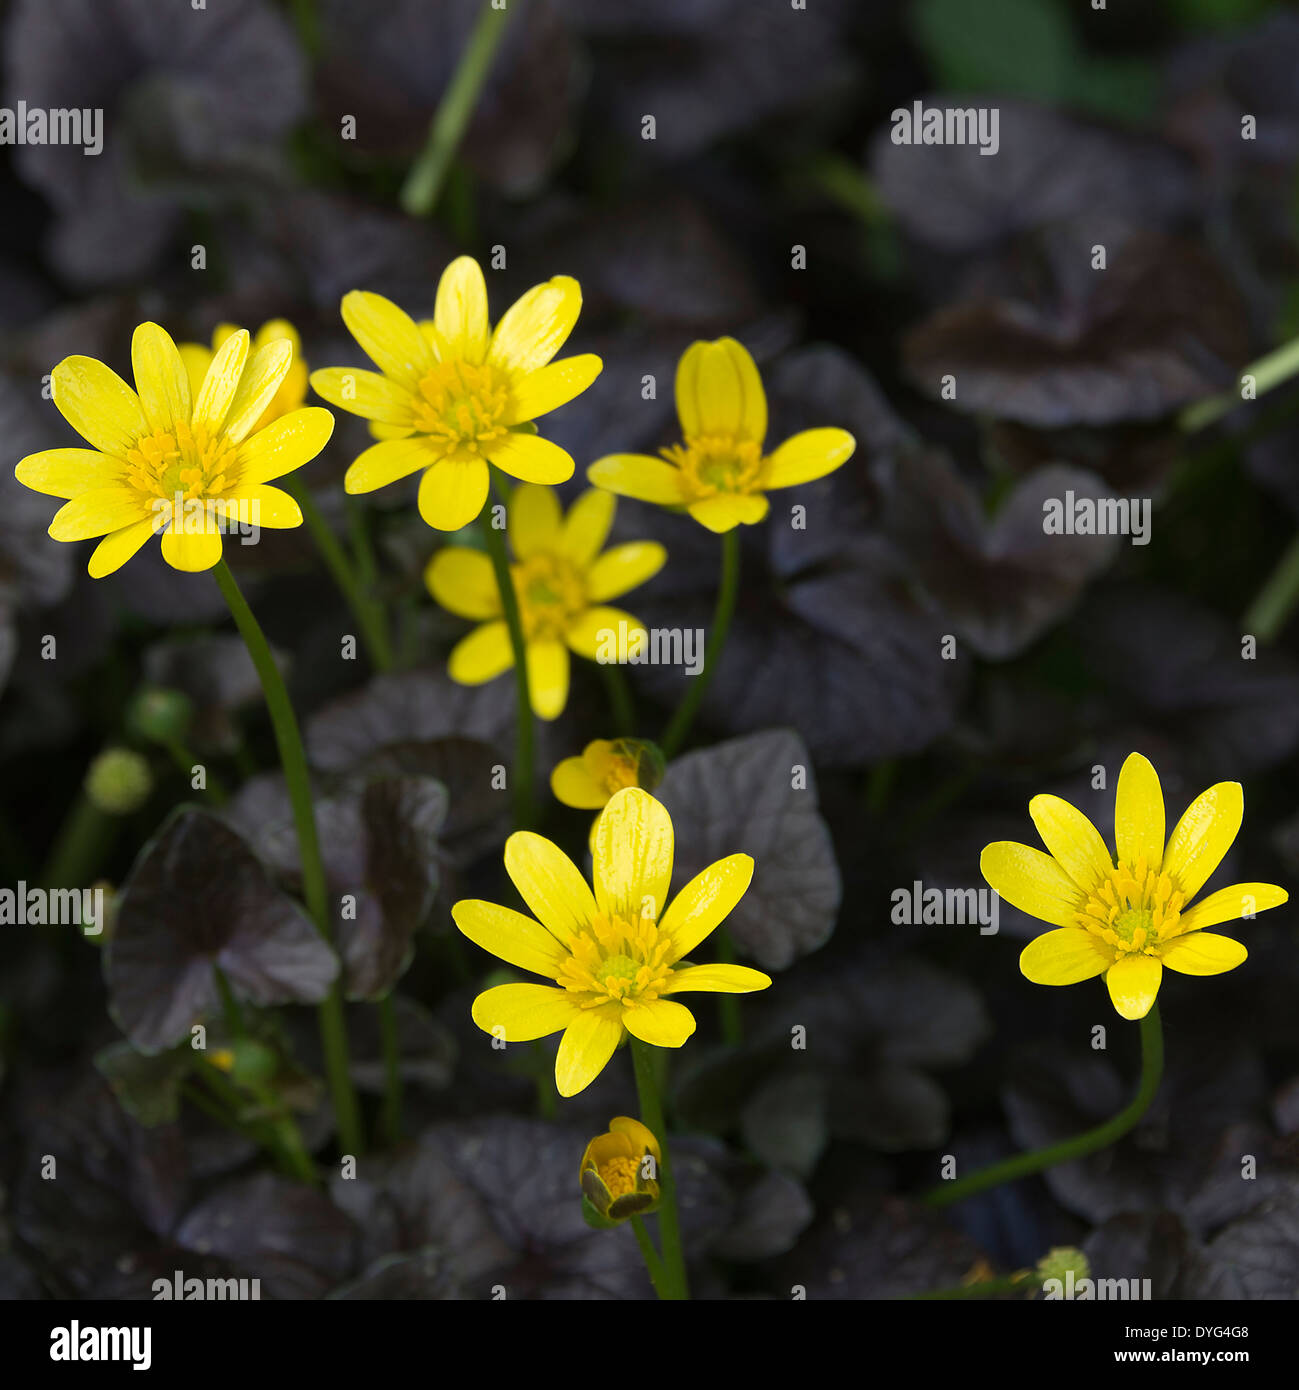 Cluster Of Clump Forming Yellow Lesser Celandine Flowers Brazen Hussy in an Alsager Garden Cheshire England United Kingdom UK Stock Photo